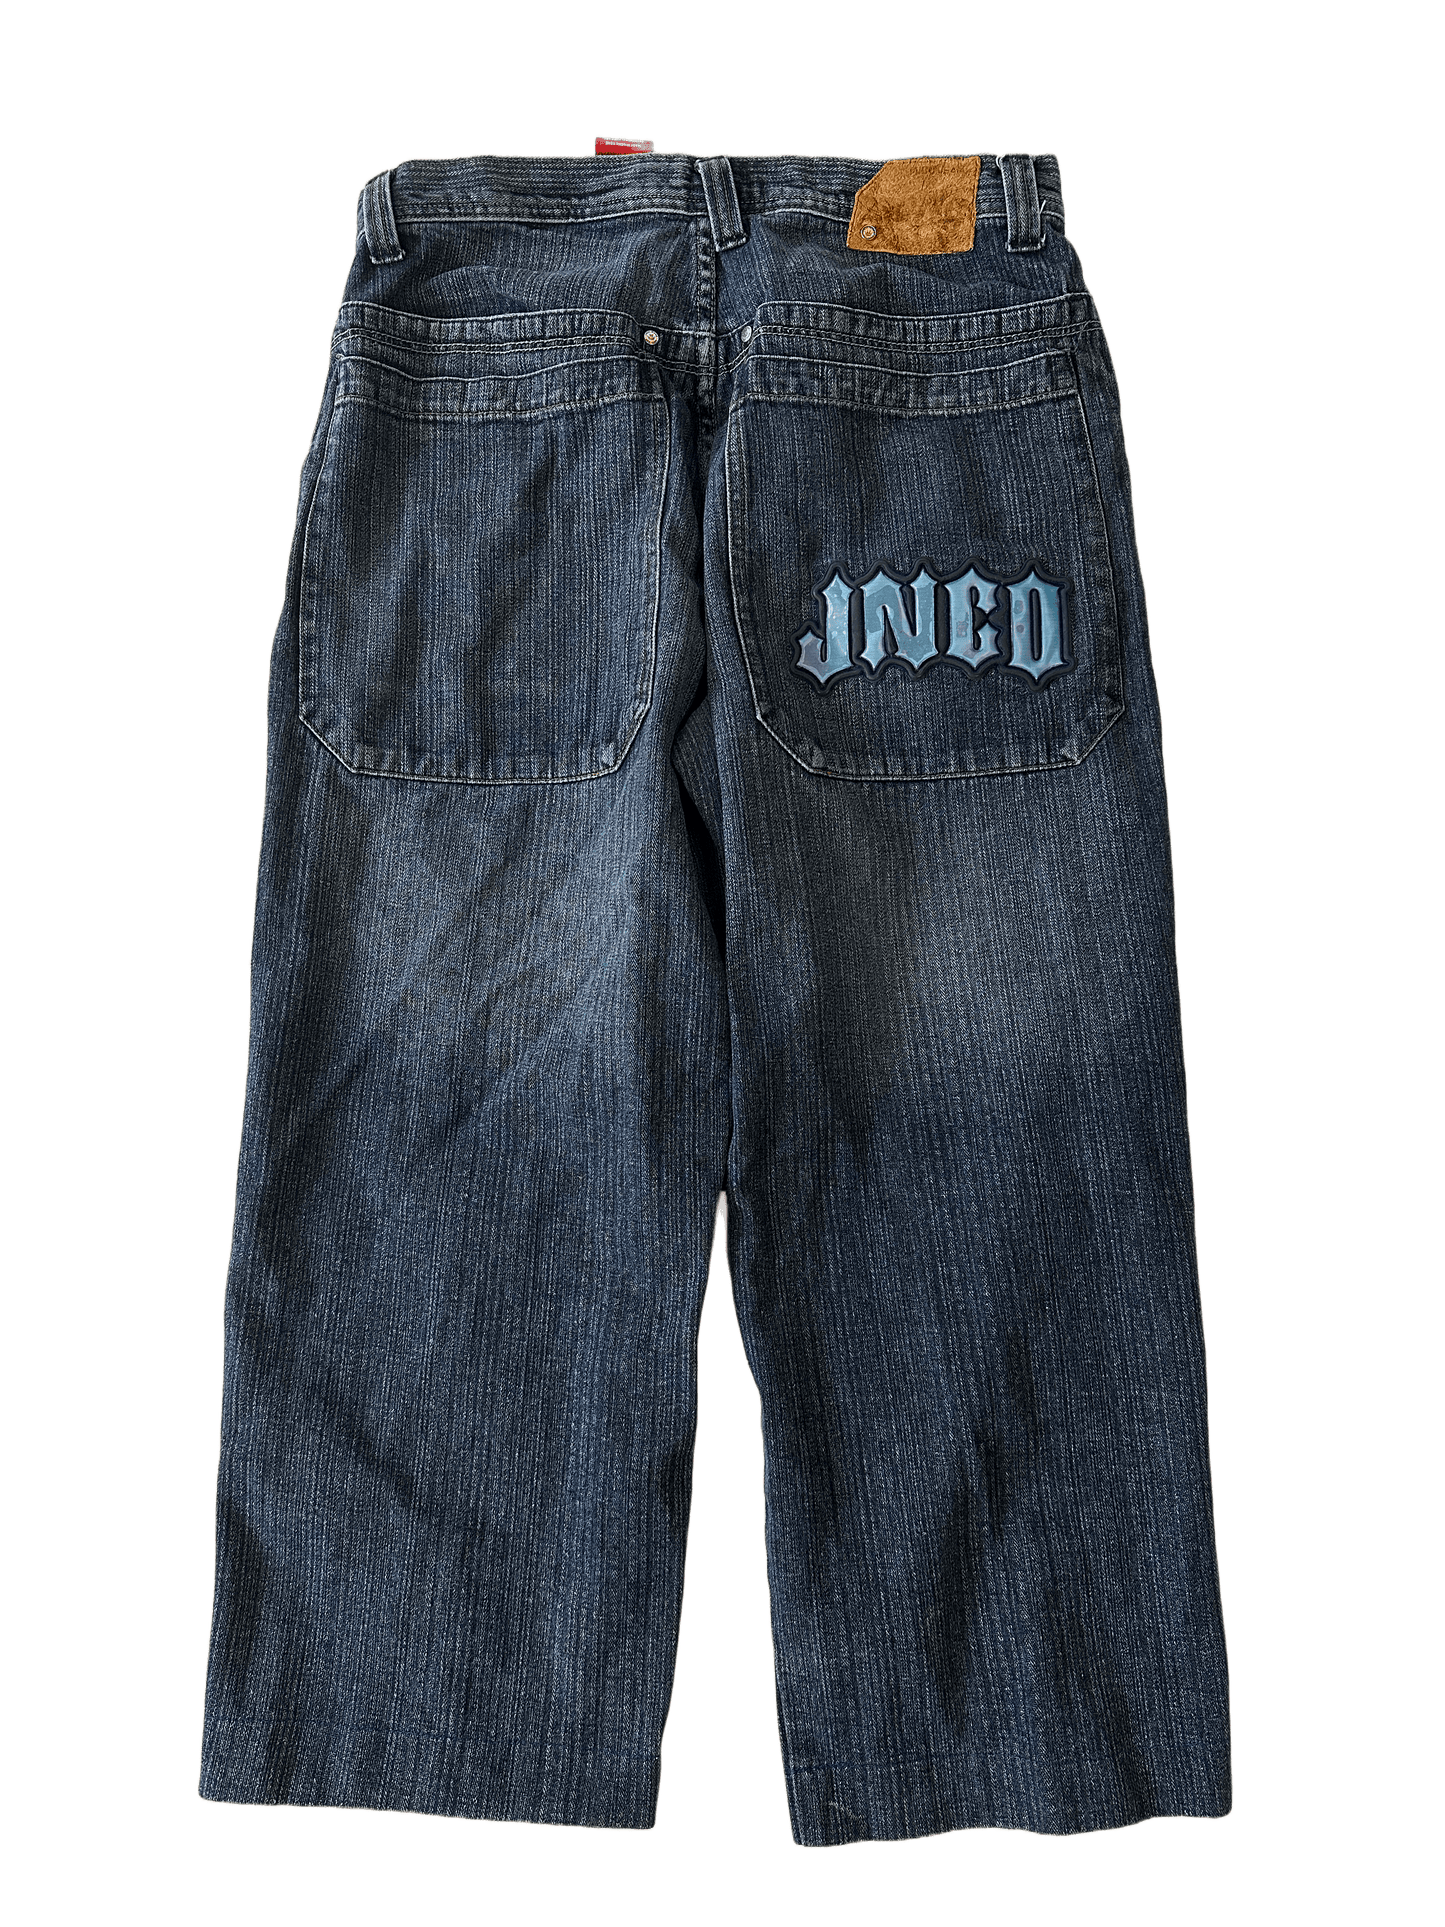 JNCO Spellout Logo Vintage Baggy Jeans (Cropped) - 36 x 26